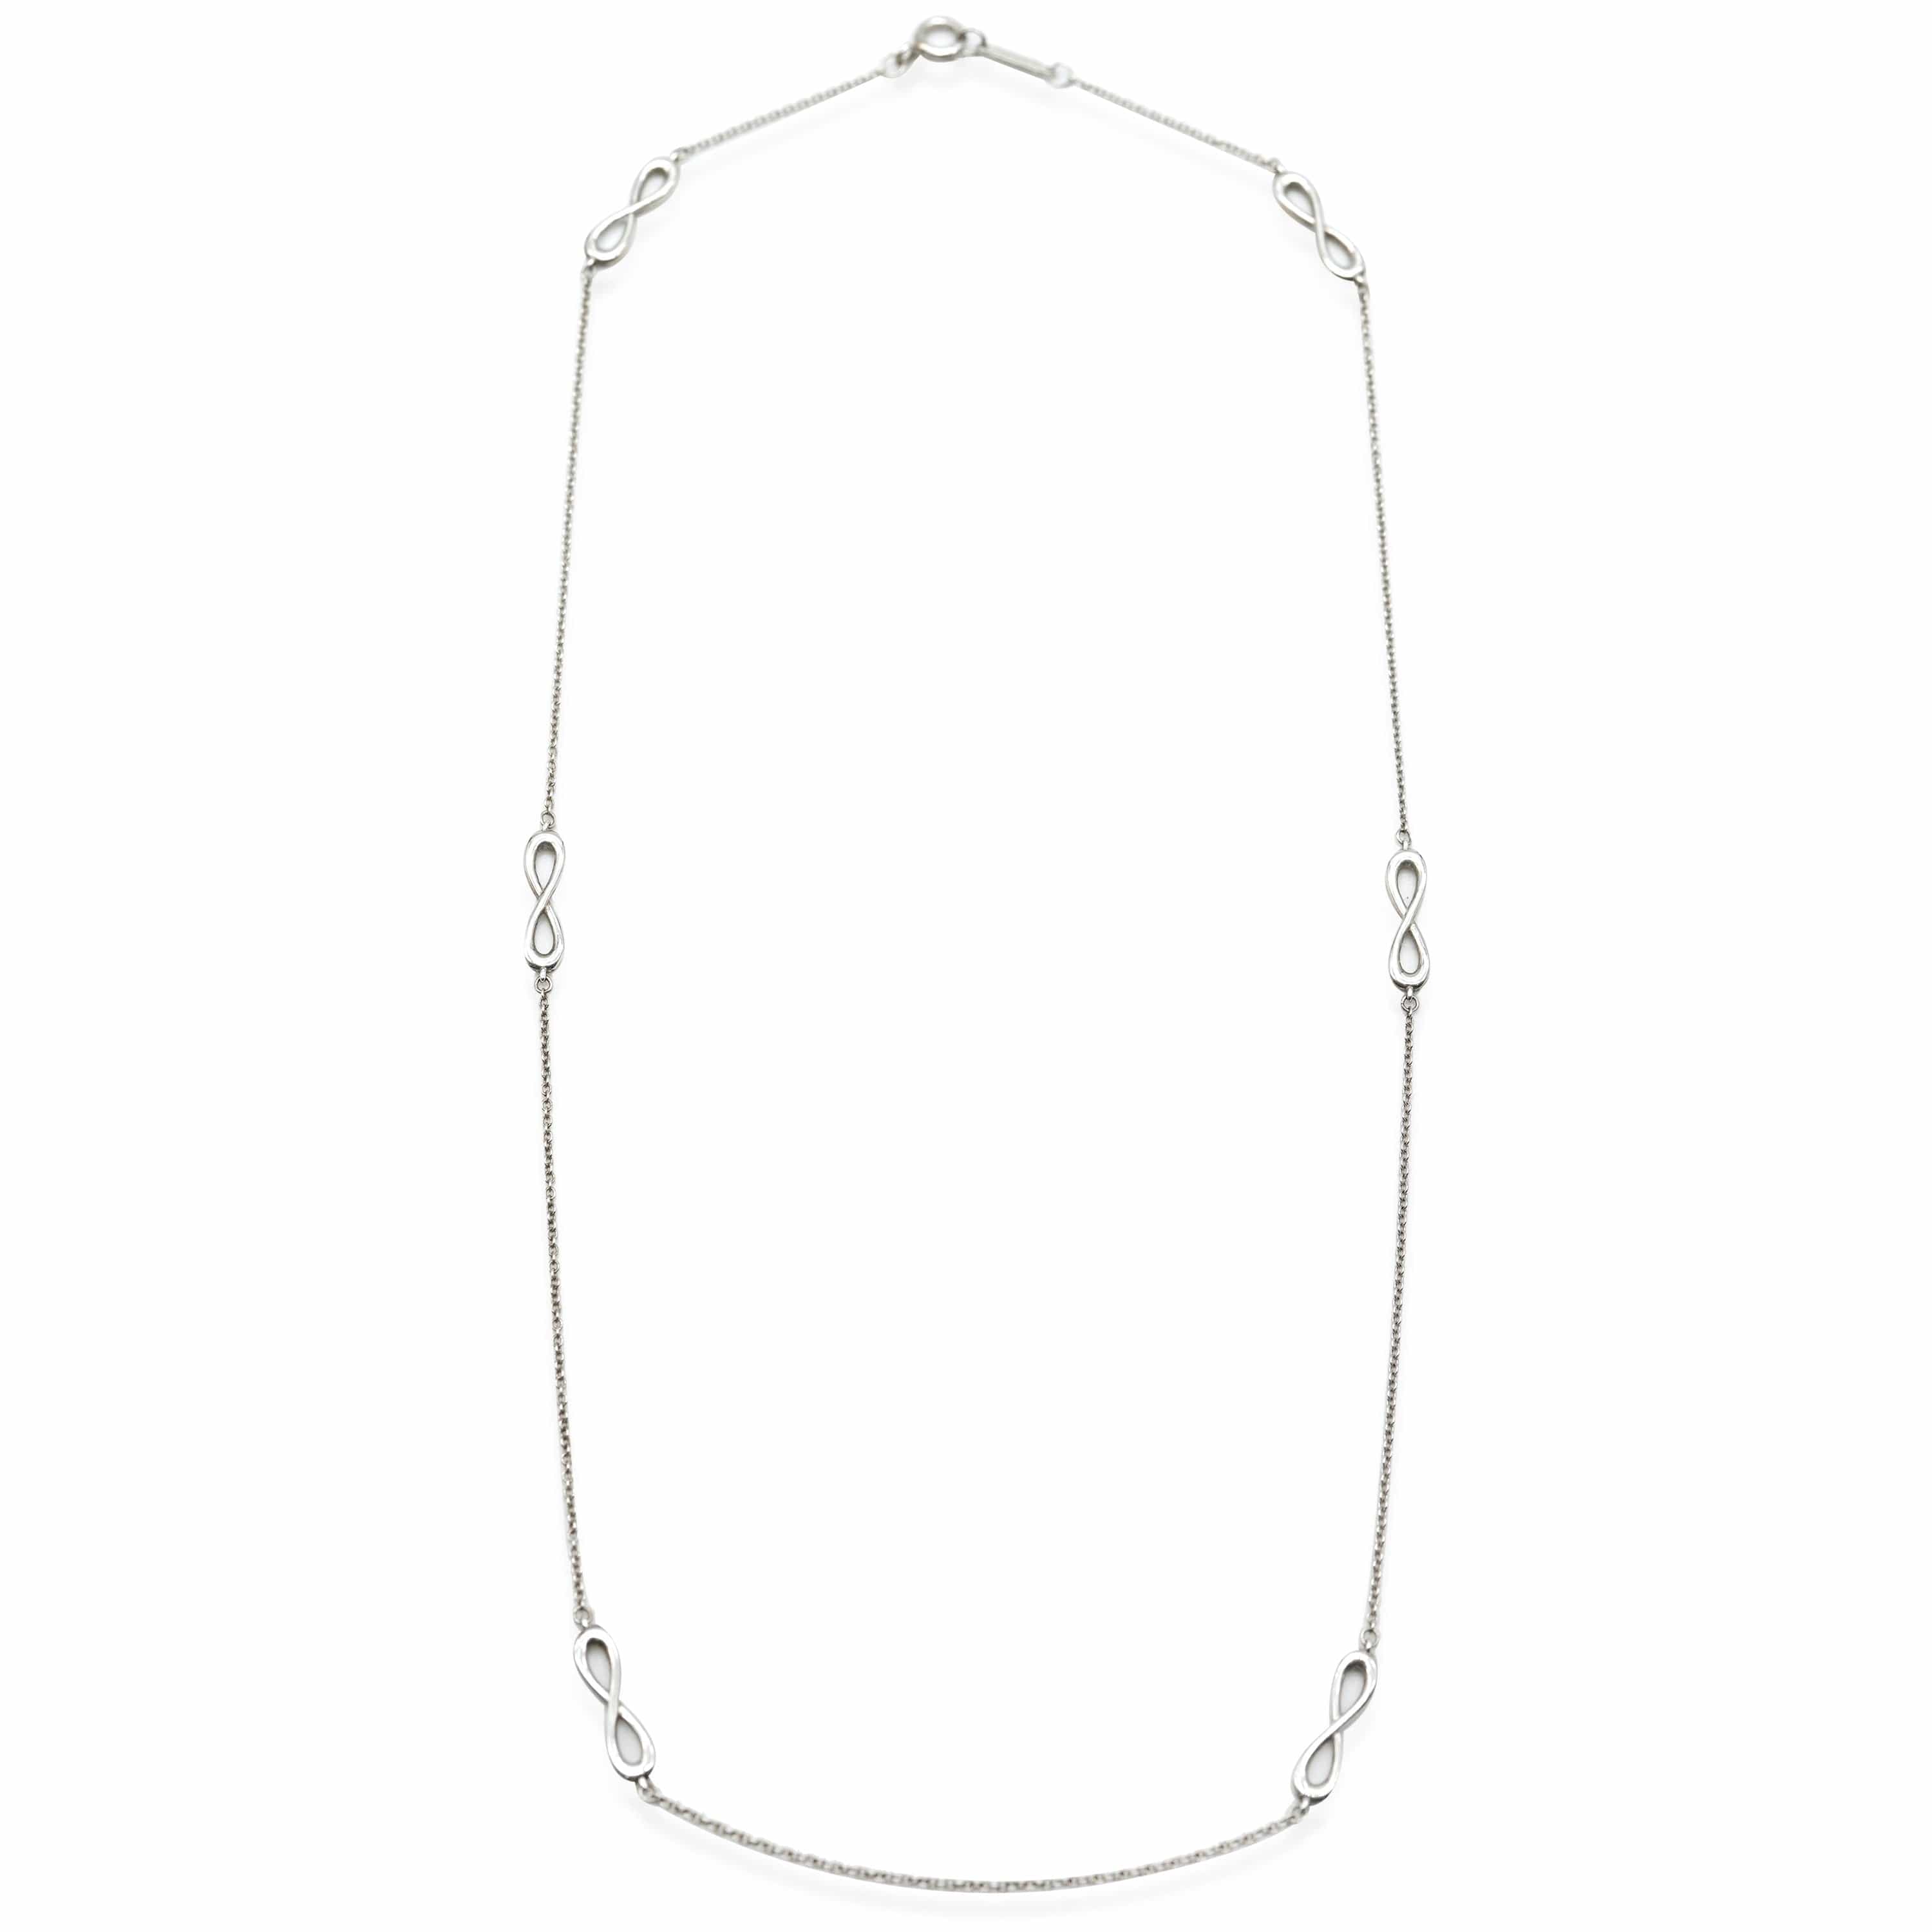 Tiffany & Co. Tiffany & Co. Infinity 6 Stations Necklace in Sterling Silver